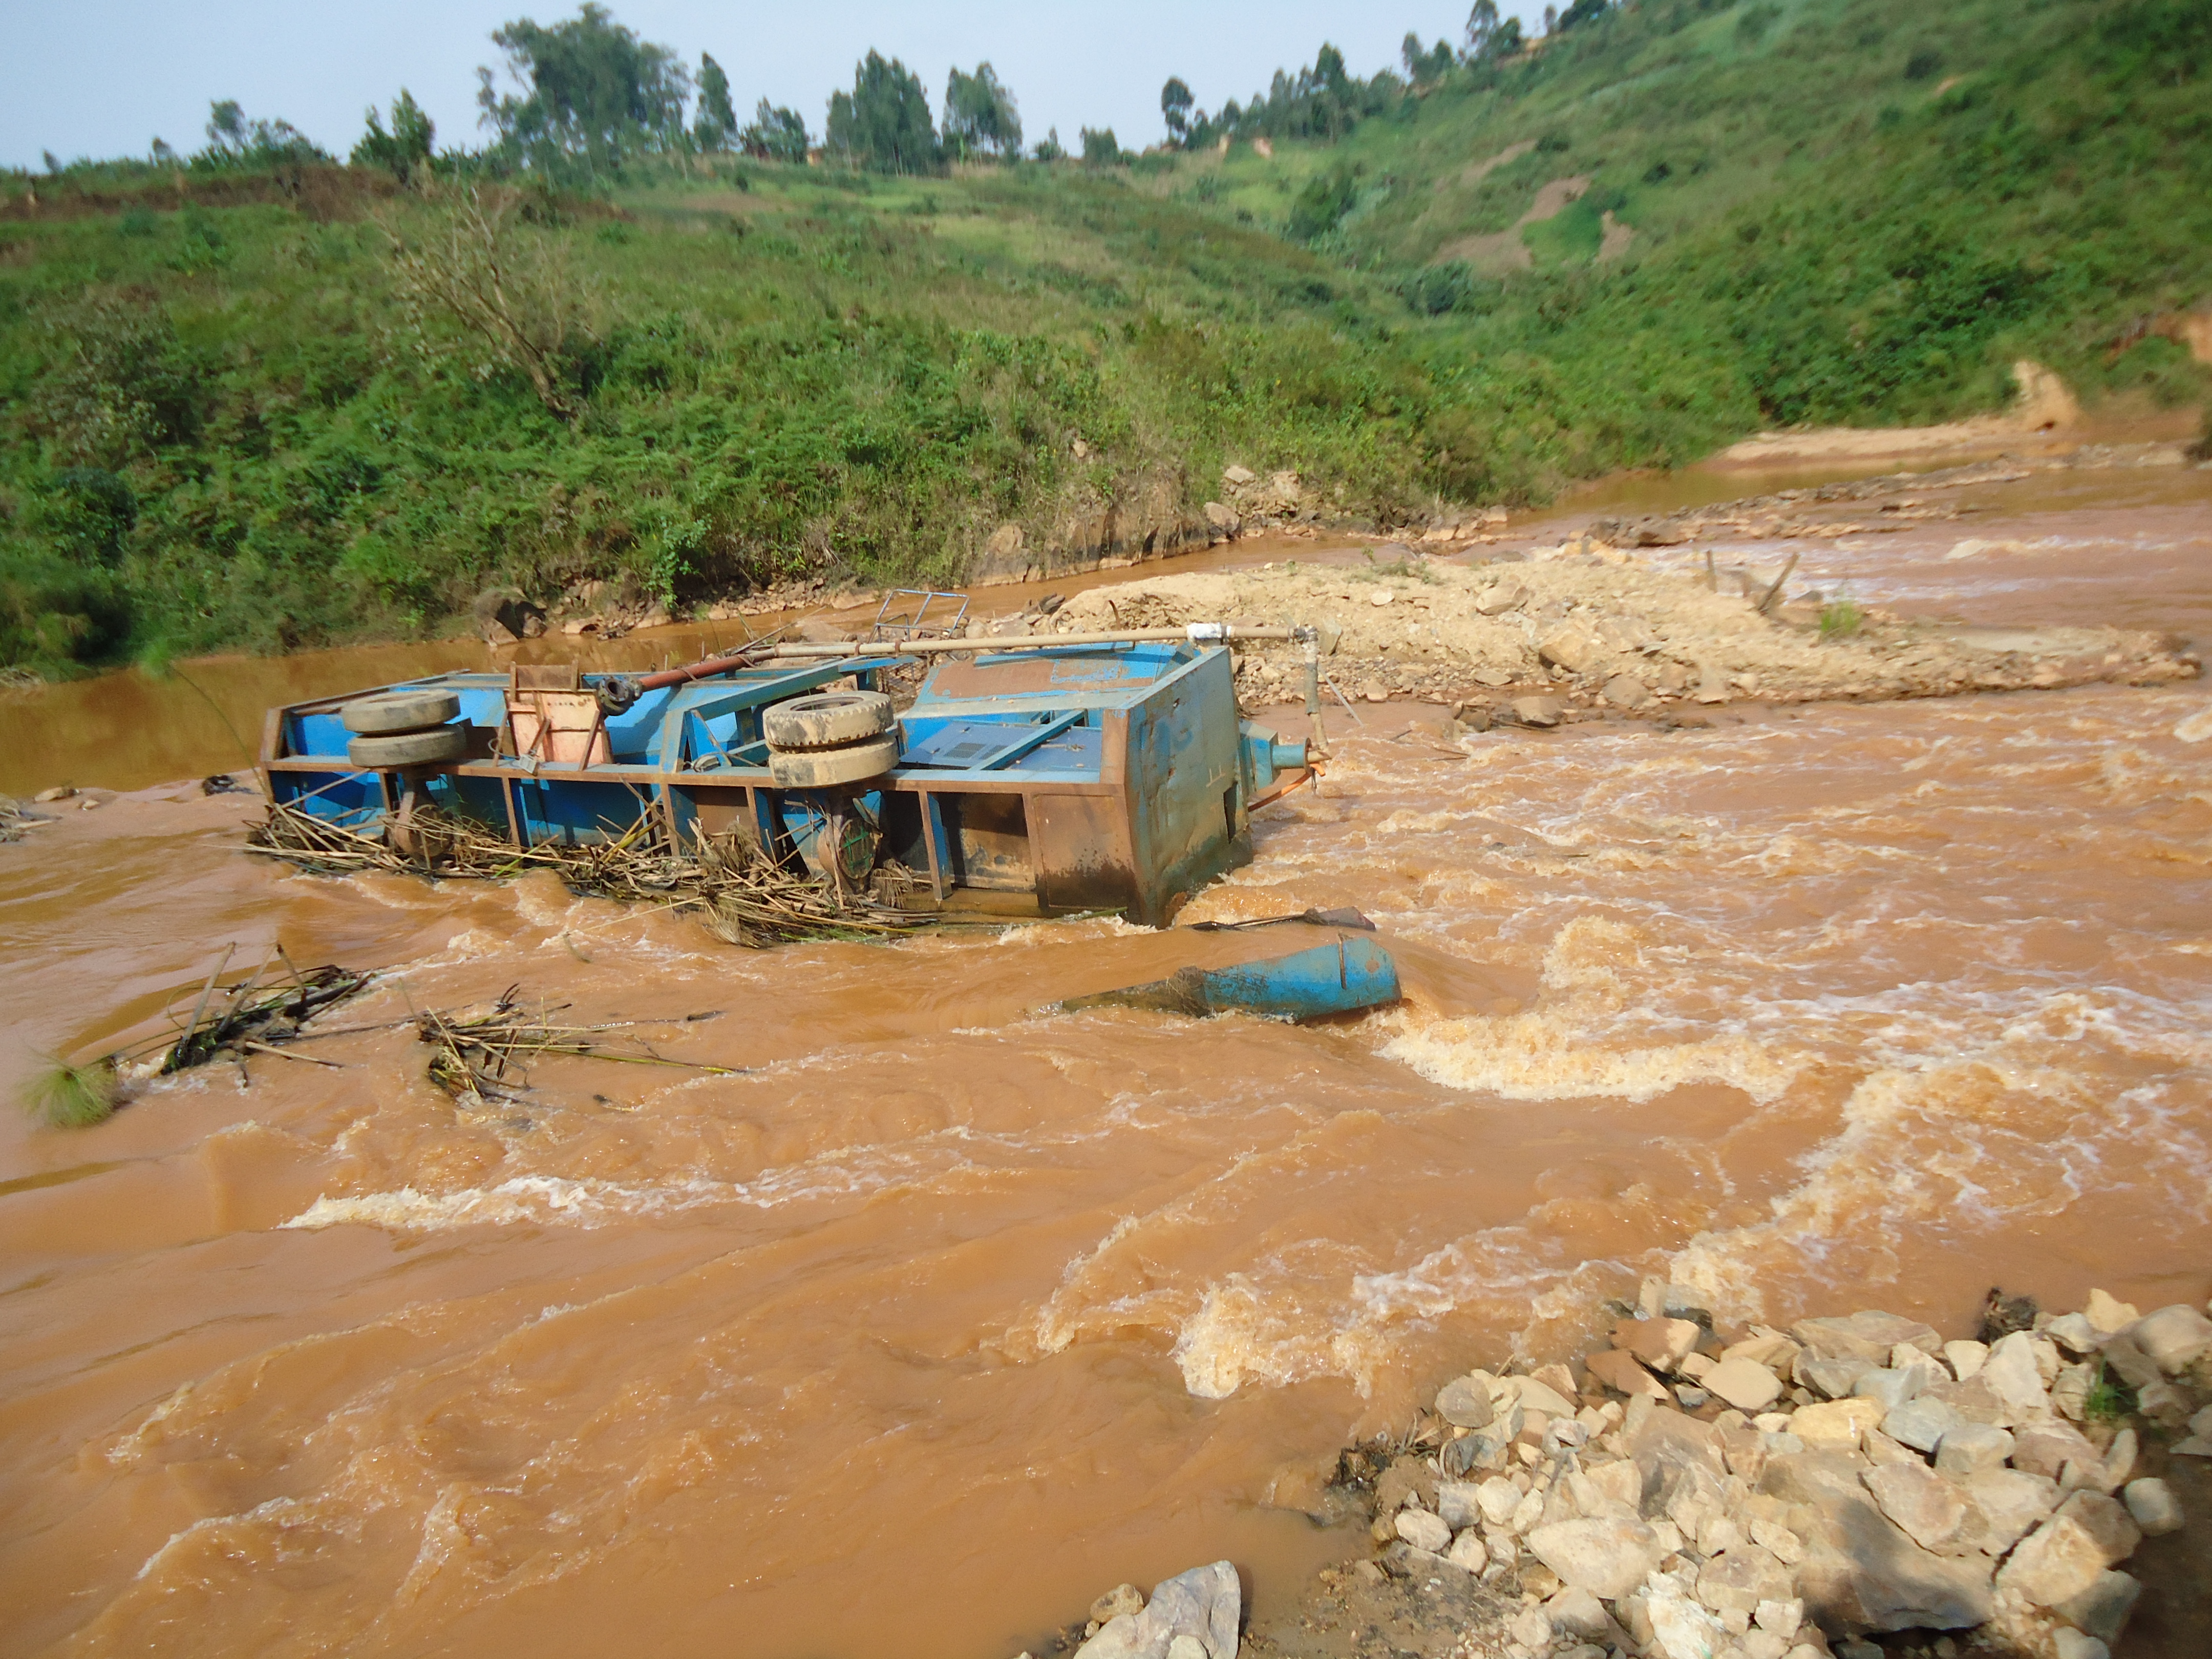 Korean Dave's Gold processing machine lying on its side in The Nizi River